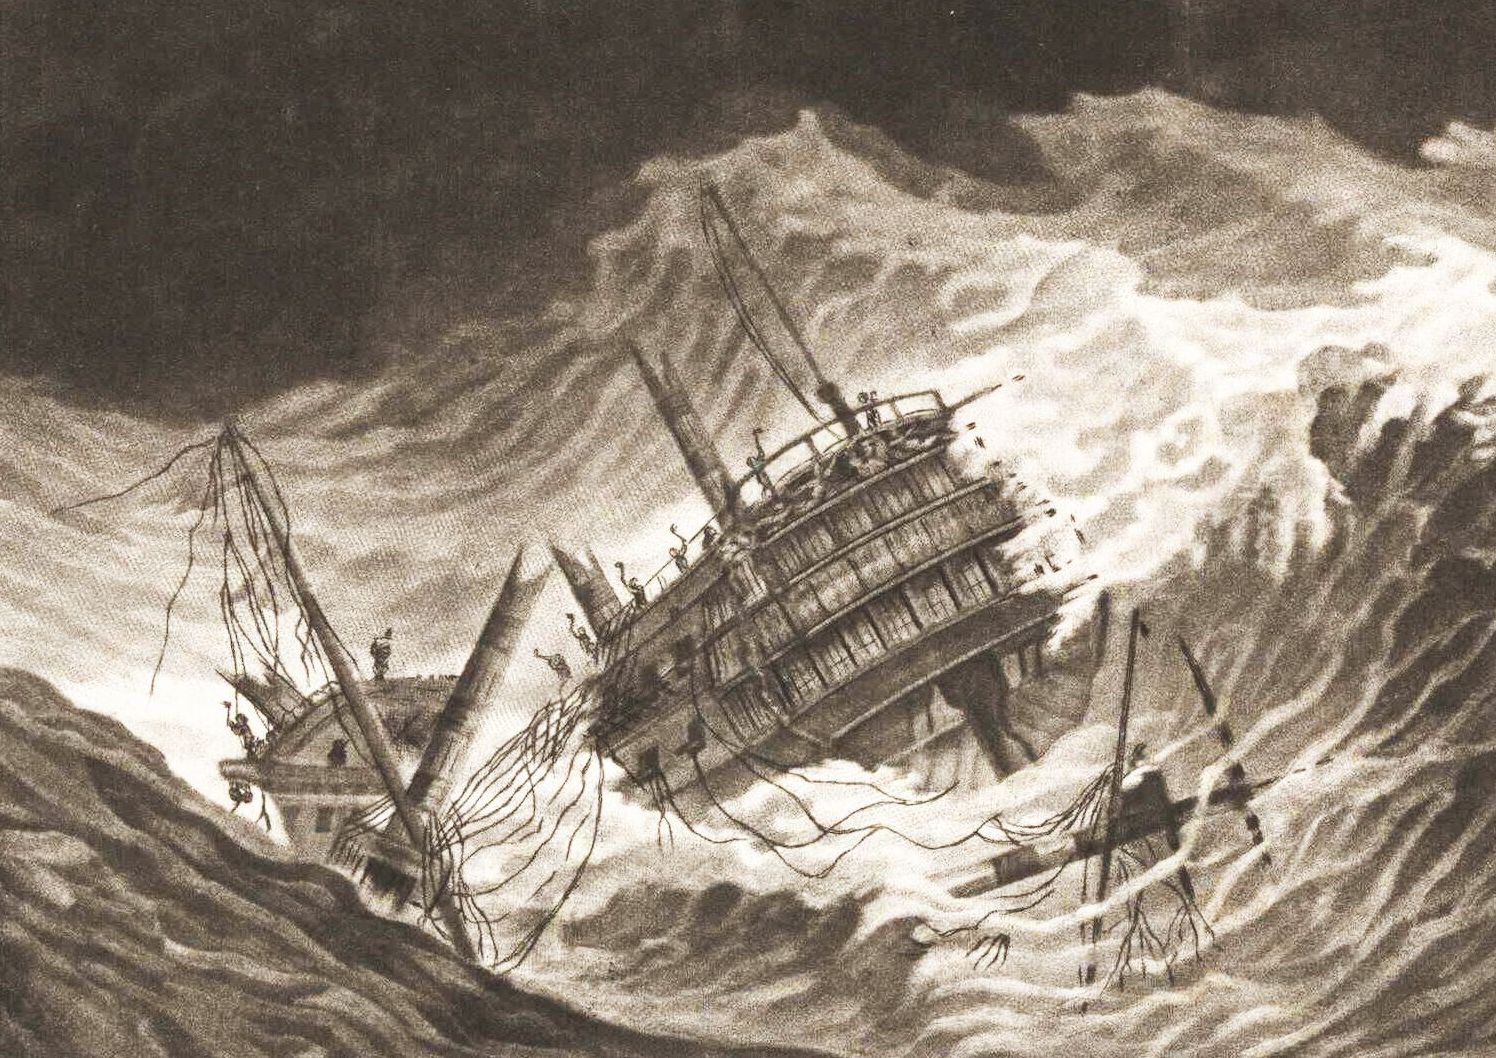 The HMS Egmont was dismasted and severely damaged in the Great Hurricane of 1780.